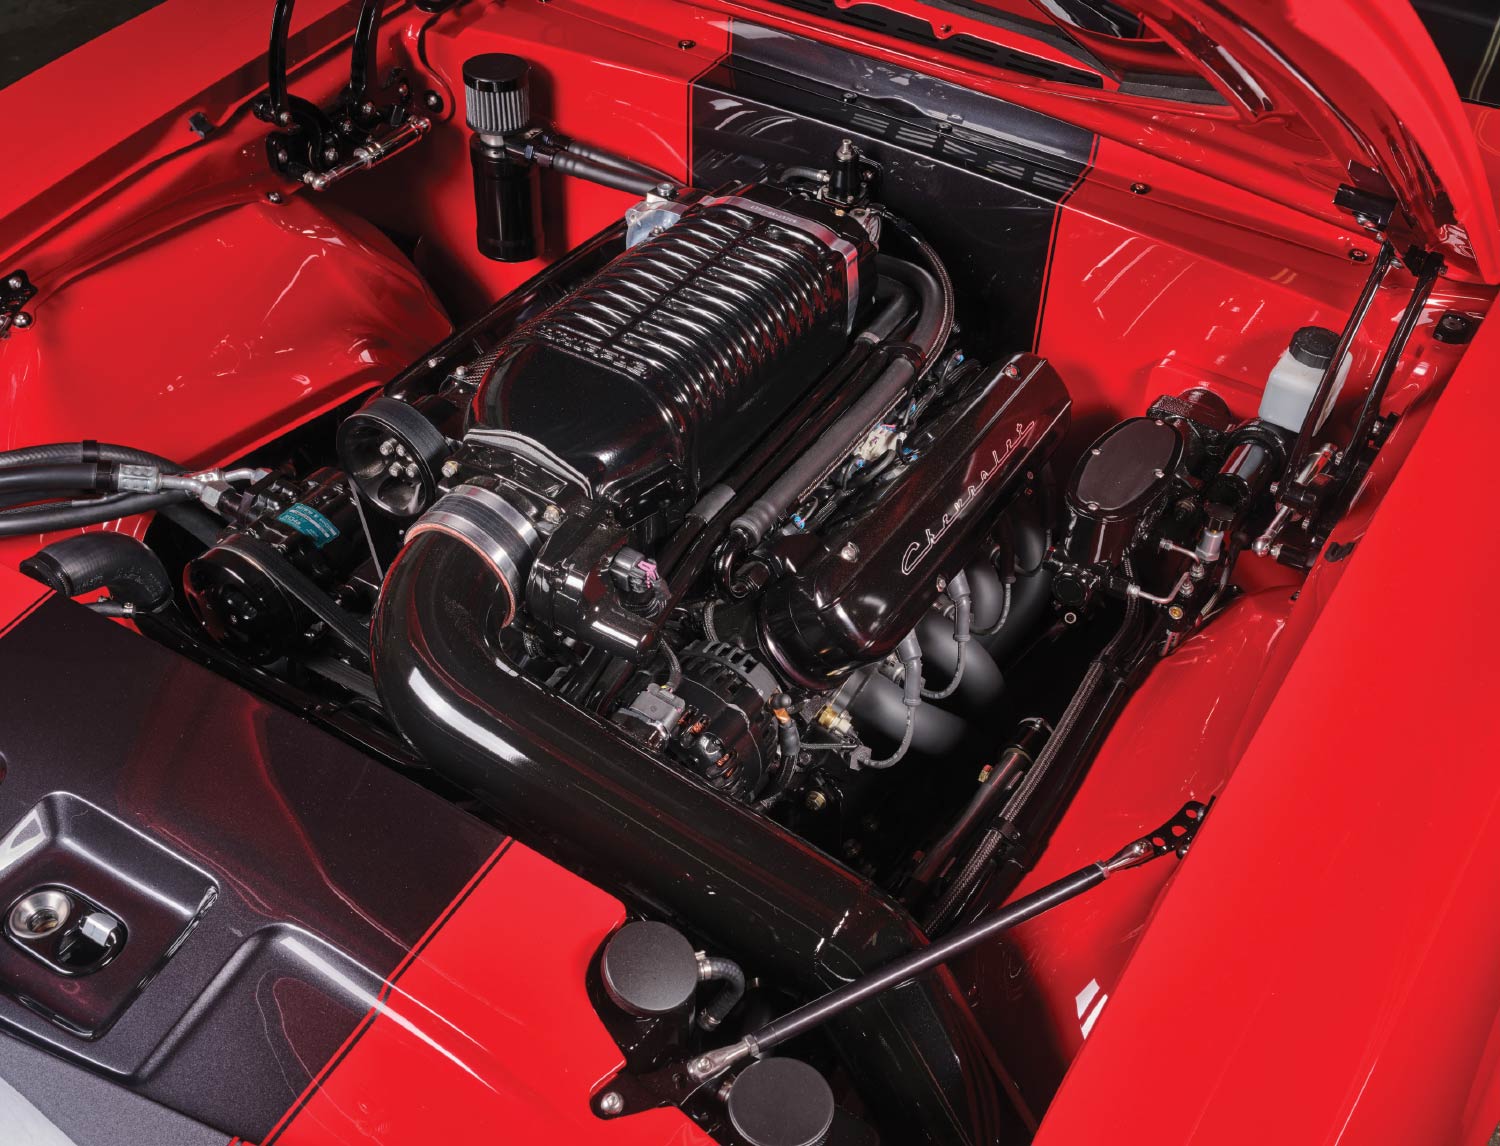 1967 Camaro's front view of engine